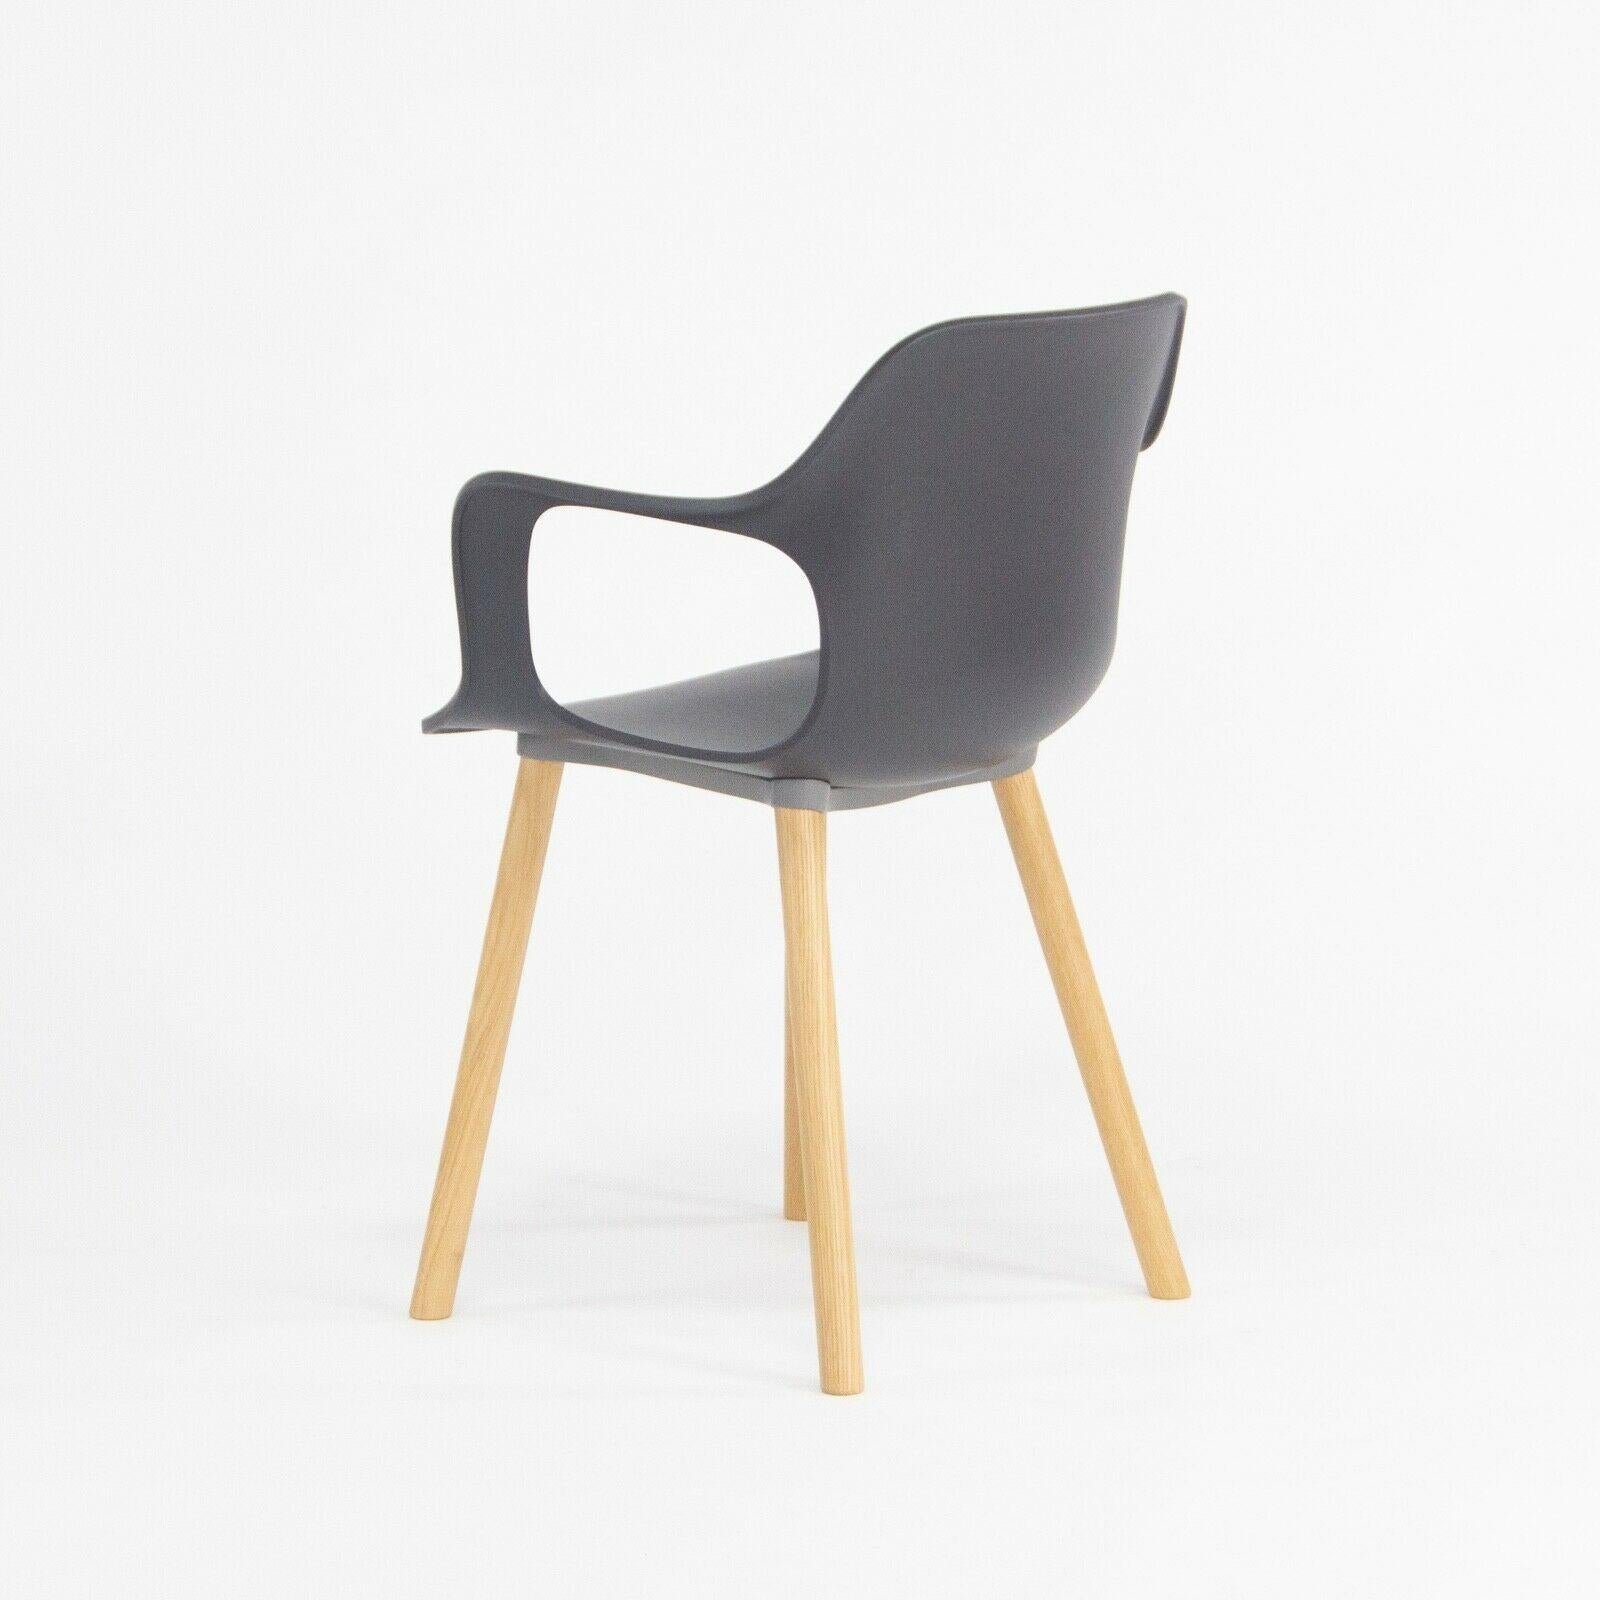 Listed for sale is a HAL Armchair with natural oak wooden legs designed by Jasper Morrison and produced by Vitra.
This chair was specified with a black plastic seat and oak legs. The chair shows minimal if any notable wear. It was produced in 2018